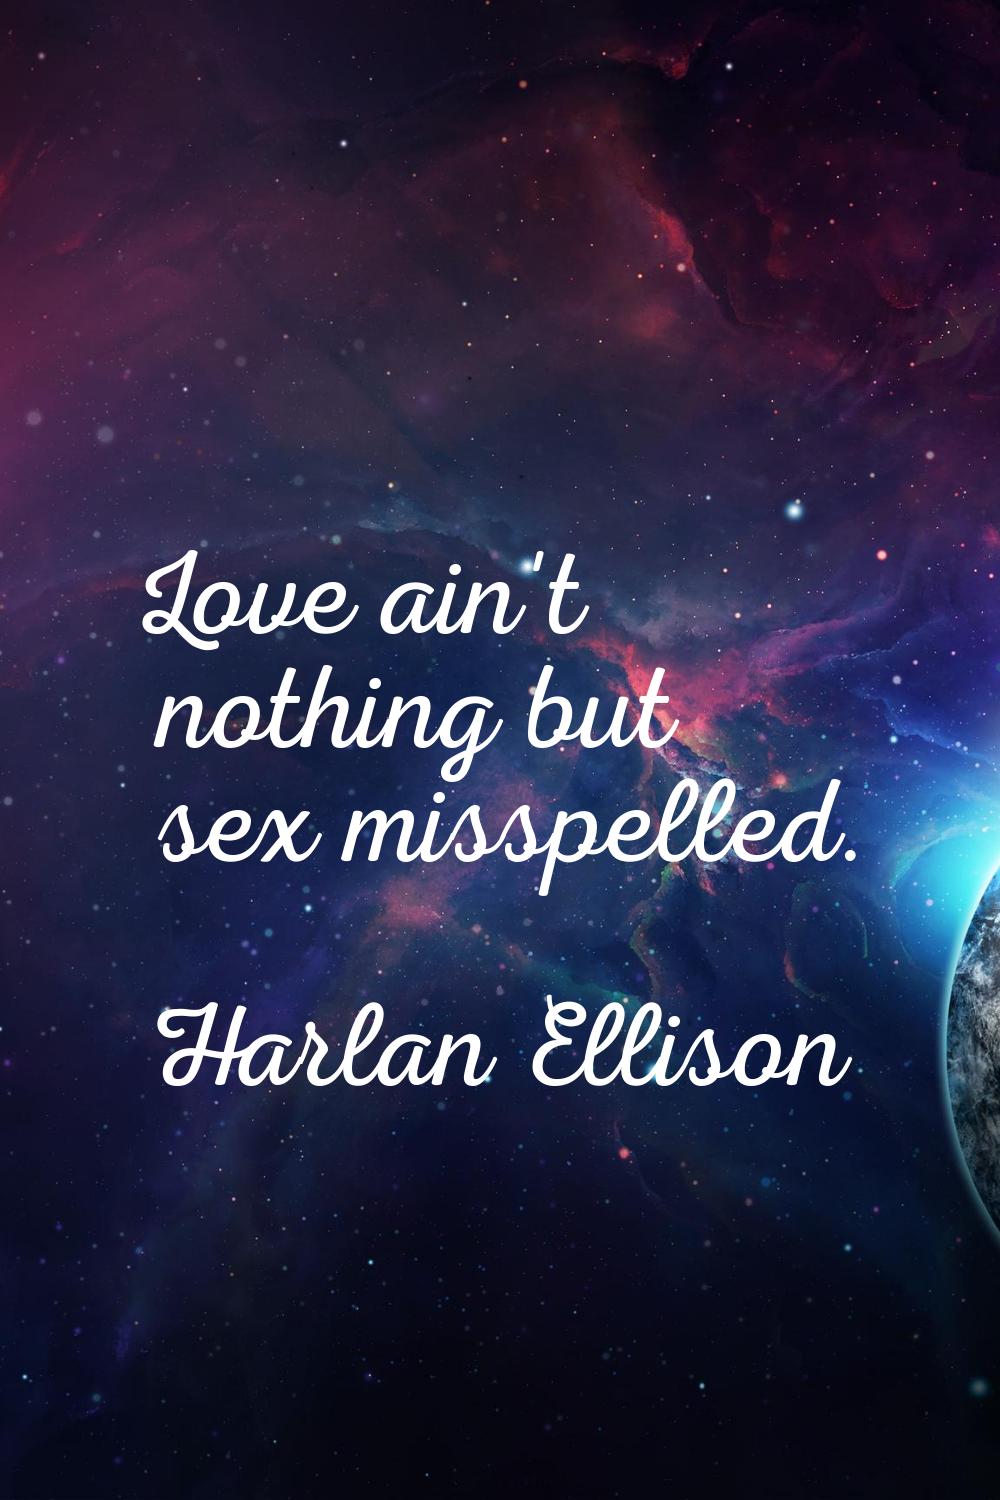 Love ain't nothing but sex misspelled.